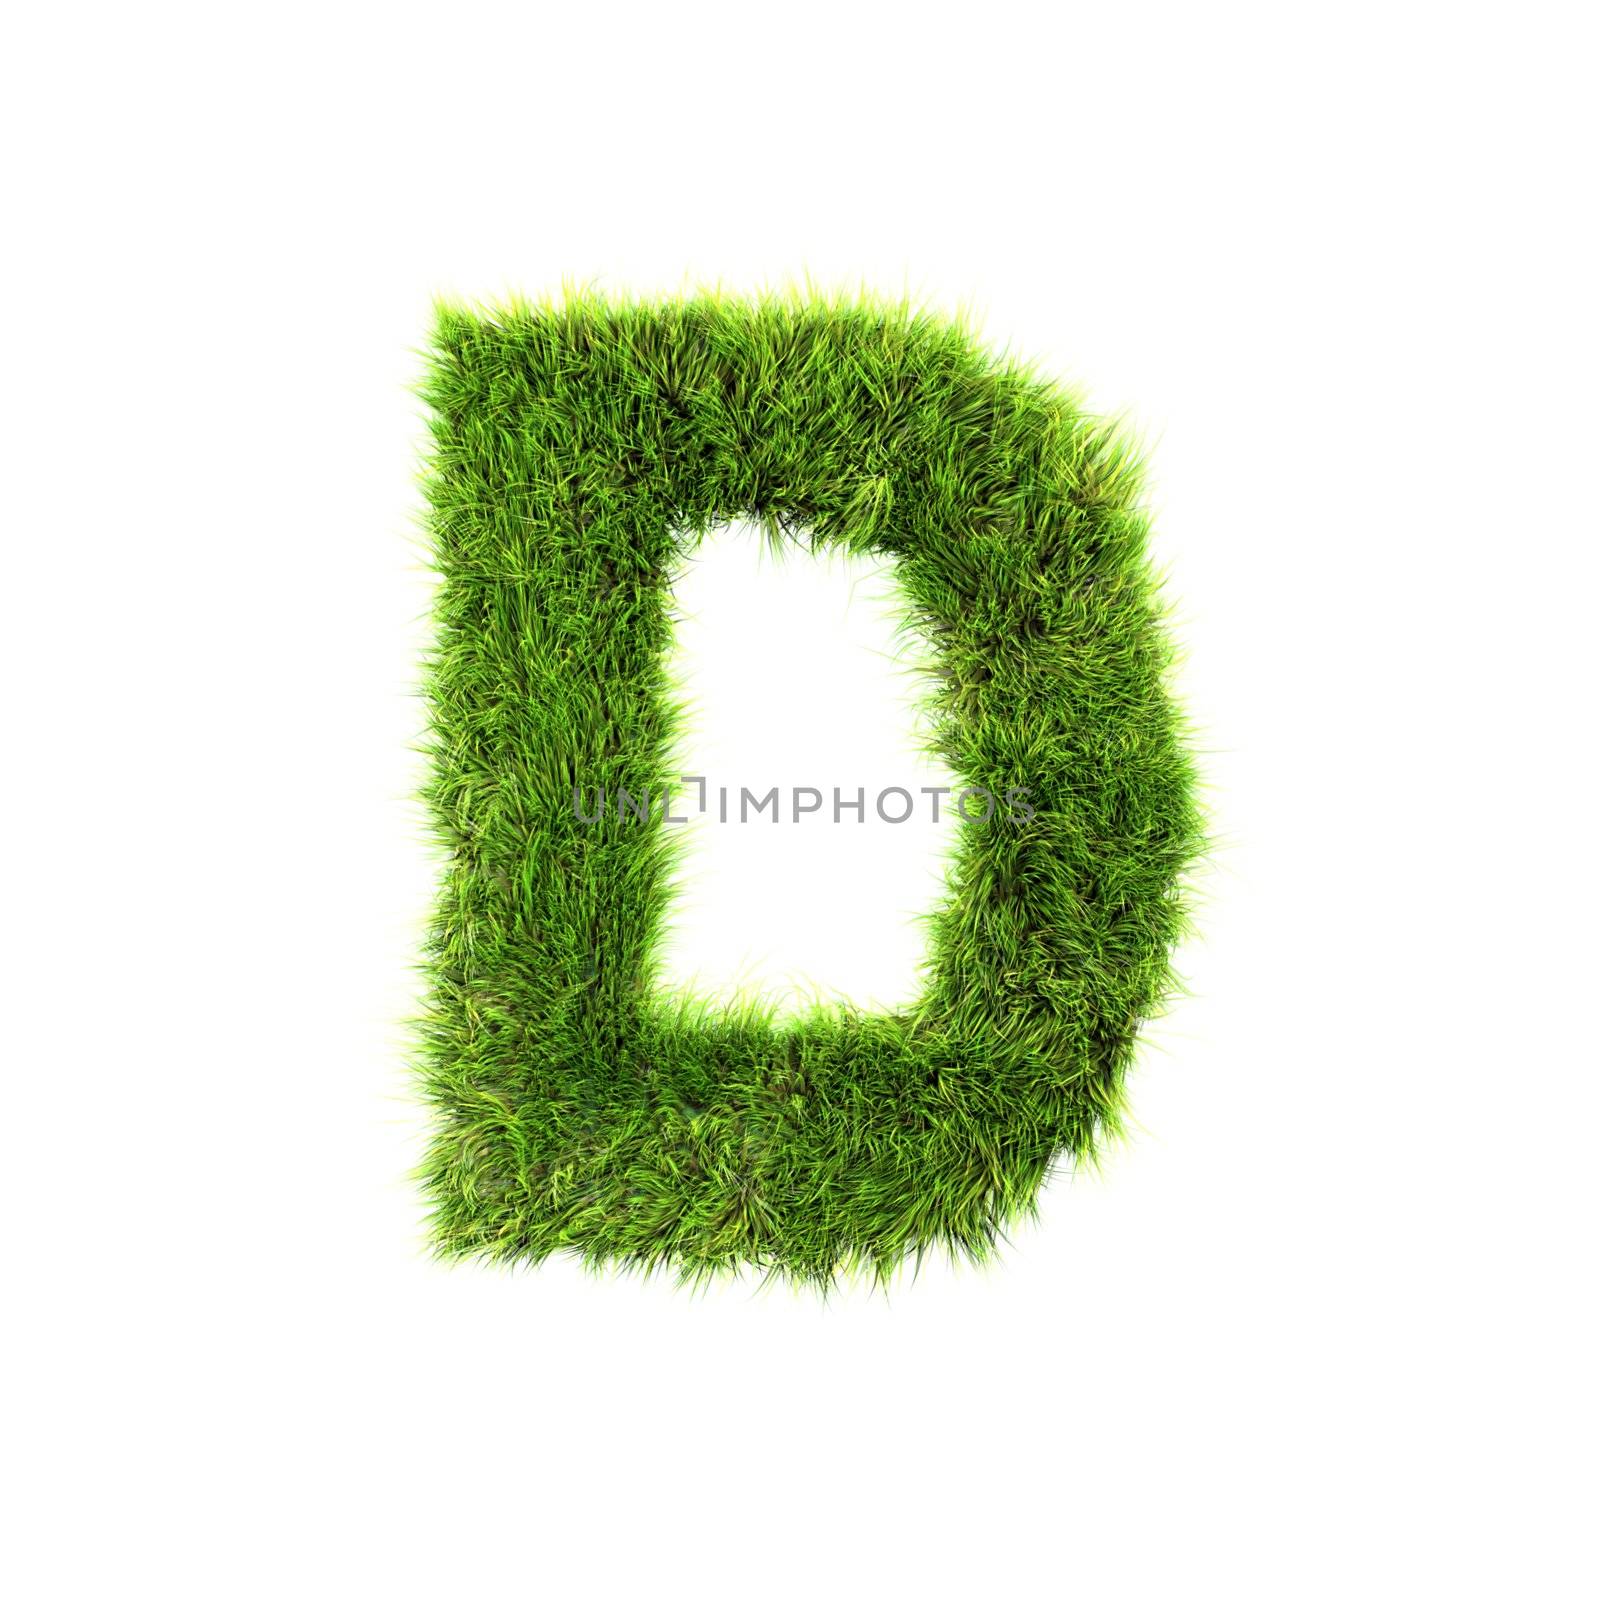 3d grass letter isolated on white background - D